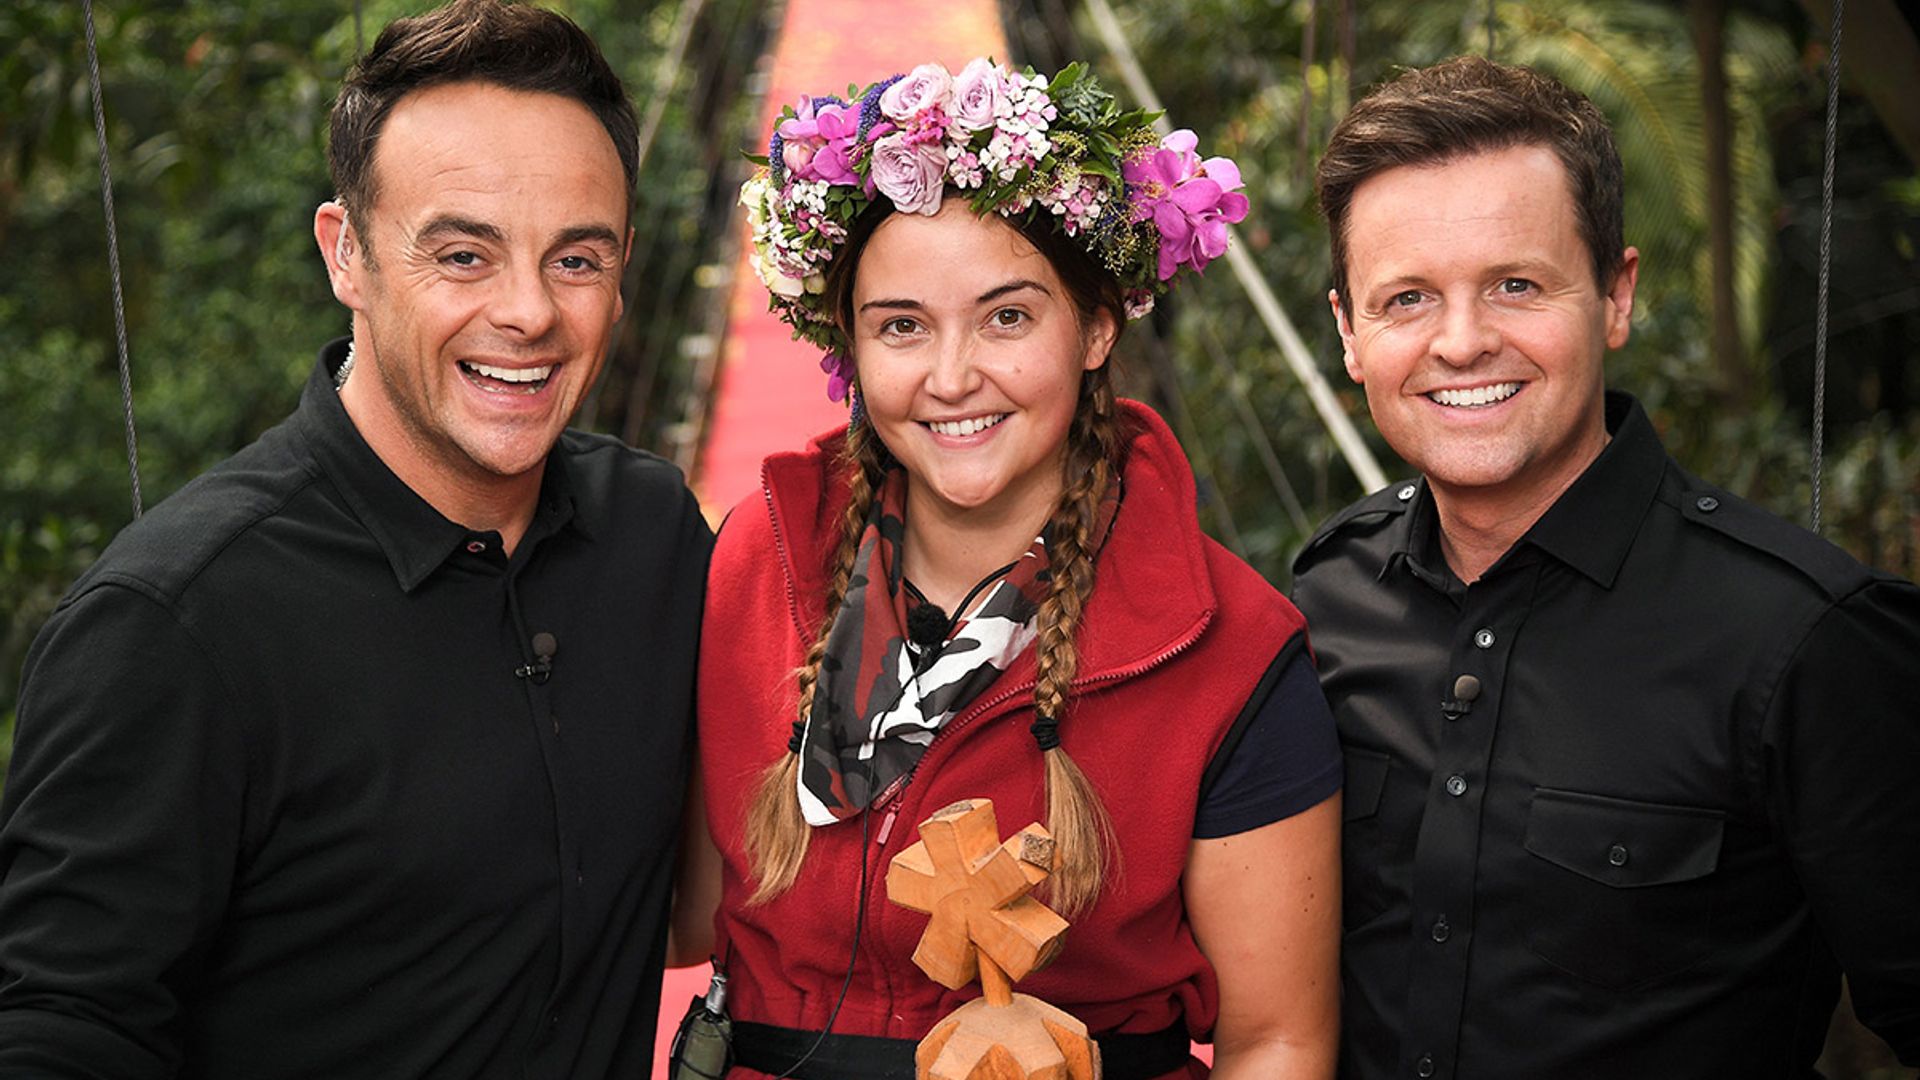 Jacqueline Jossa just made I'm A Celebrity history - find out why